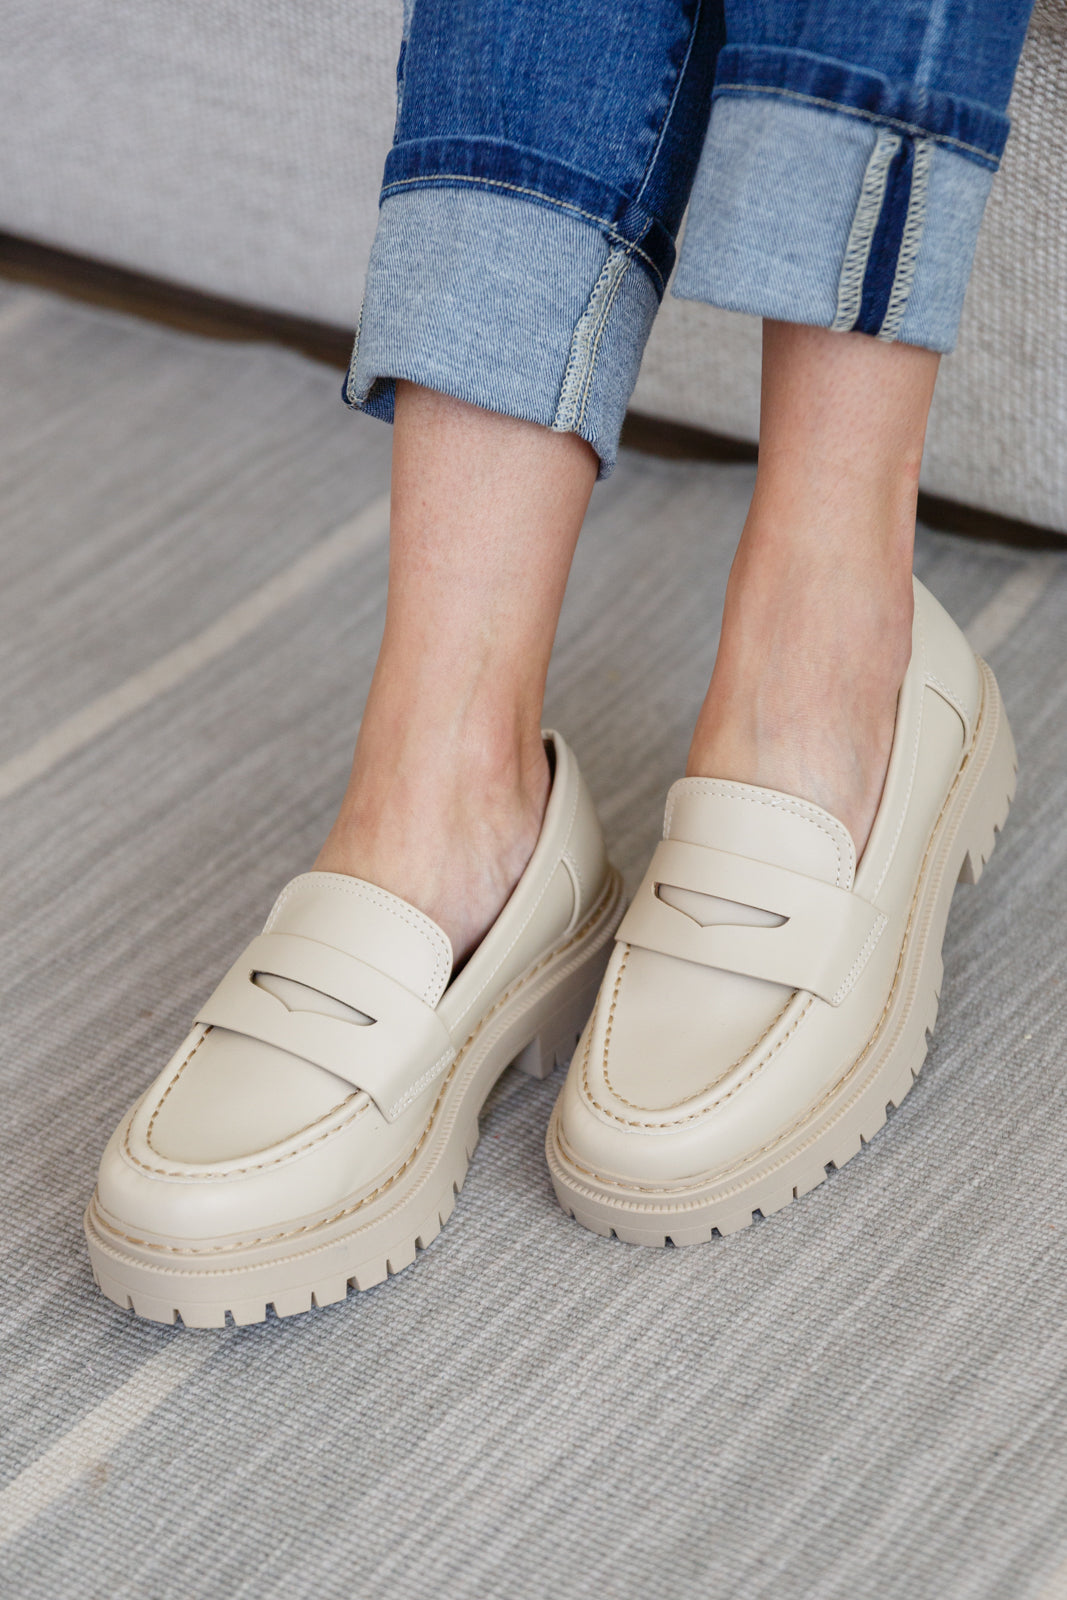 Penny For Your Thoughts Loafers in Bone - Pecan Hill Boutique